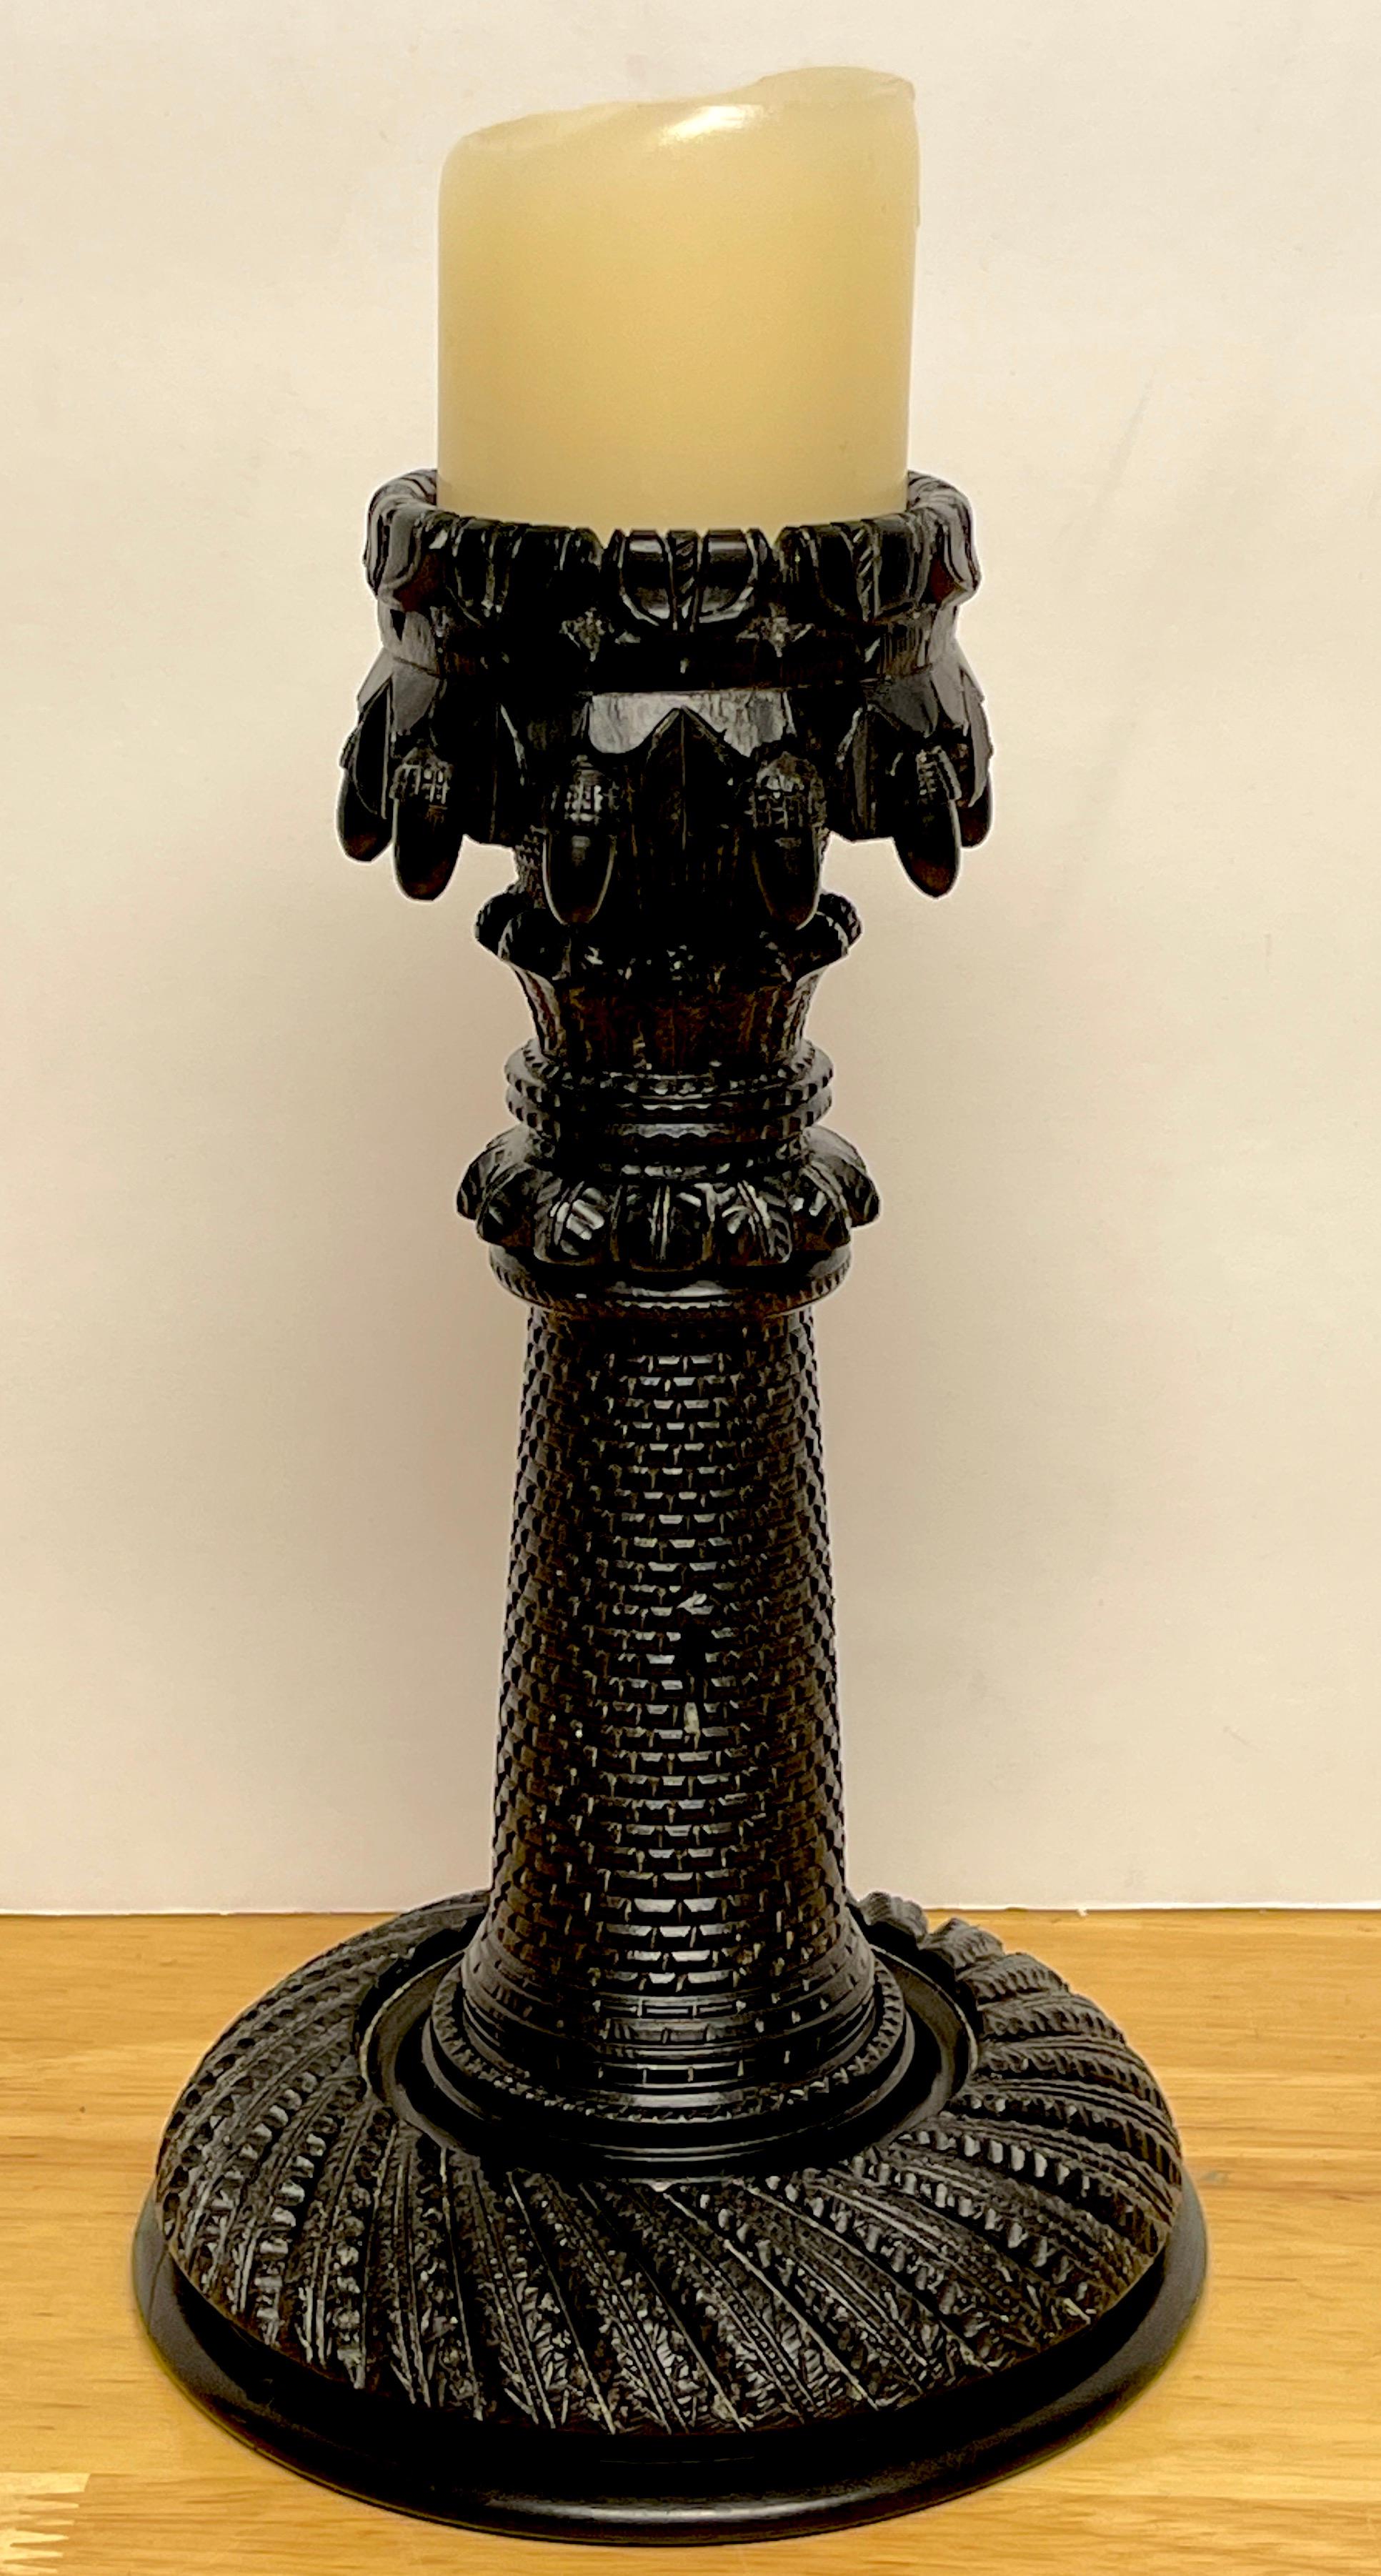 Exceptional 19th century Irish carved bog wood castle motif candlestick, Intricately carved, the bobeche with a continuous ring of carved acorns, the column of a brick and motor bricked windowed castle tower, resting on a circular reeded base. The